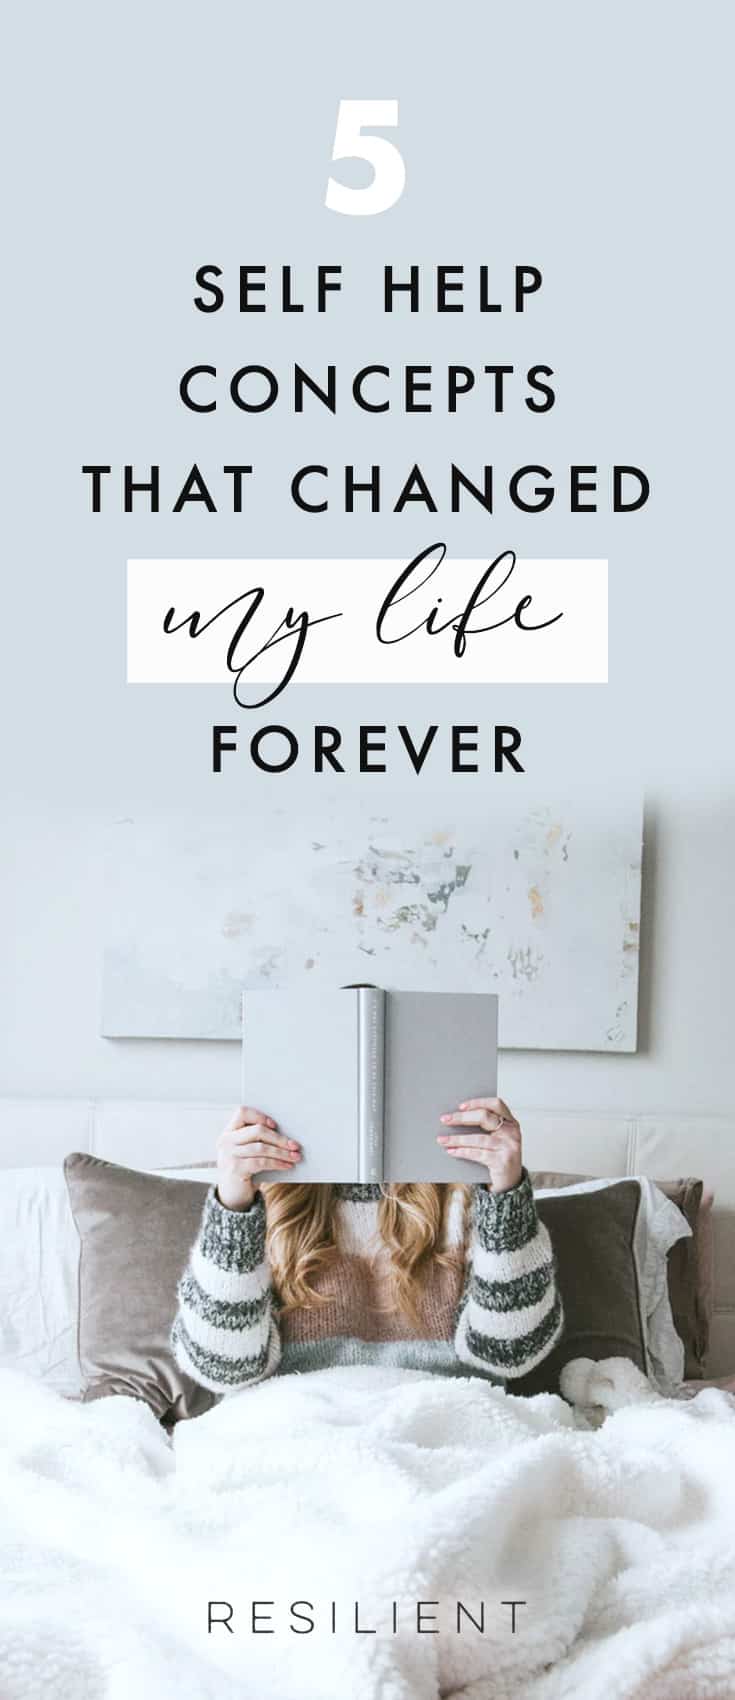 5 Self Help Concepts that Changed My Life Forever